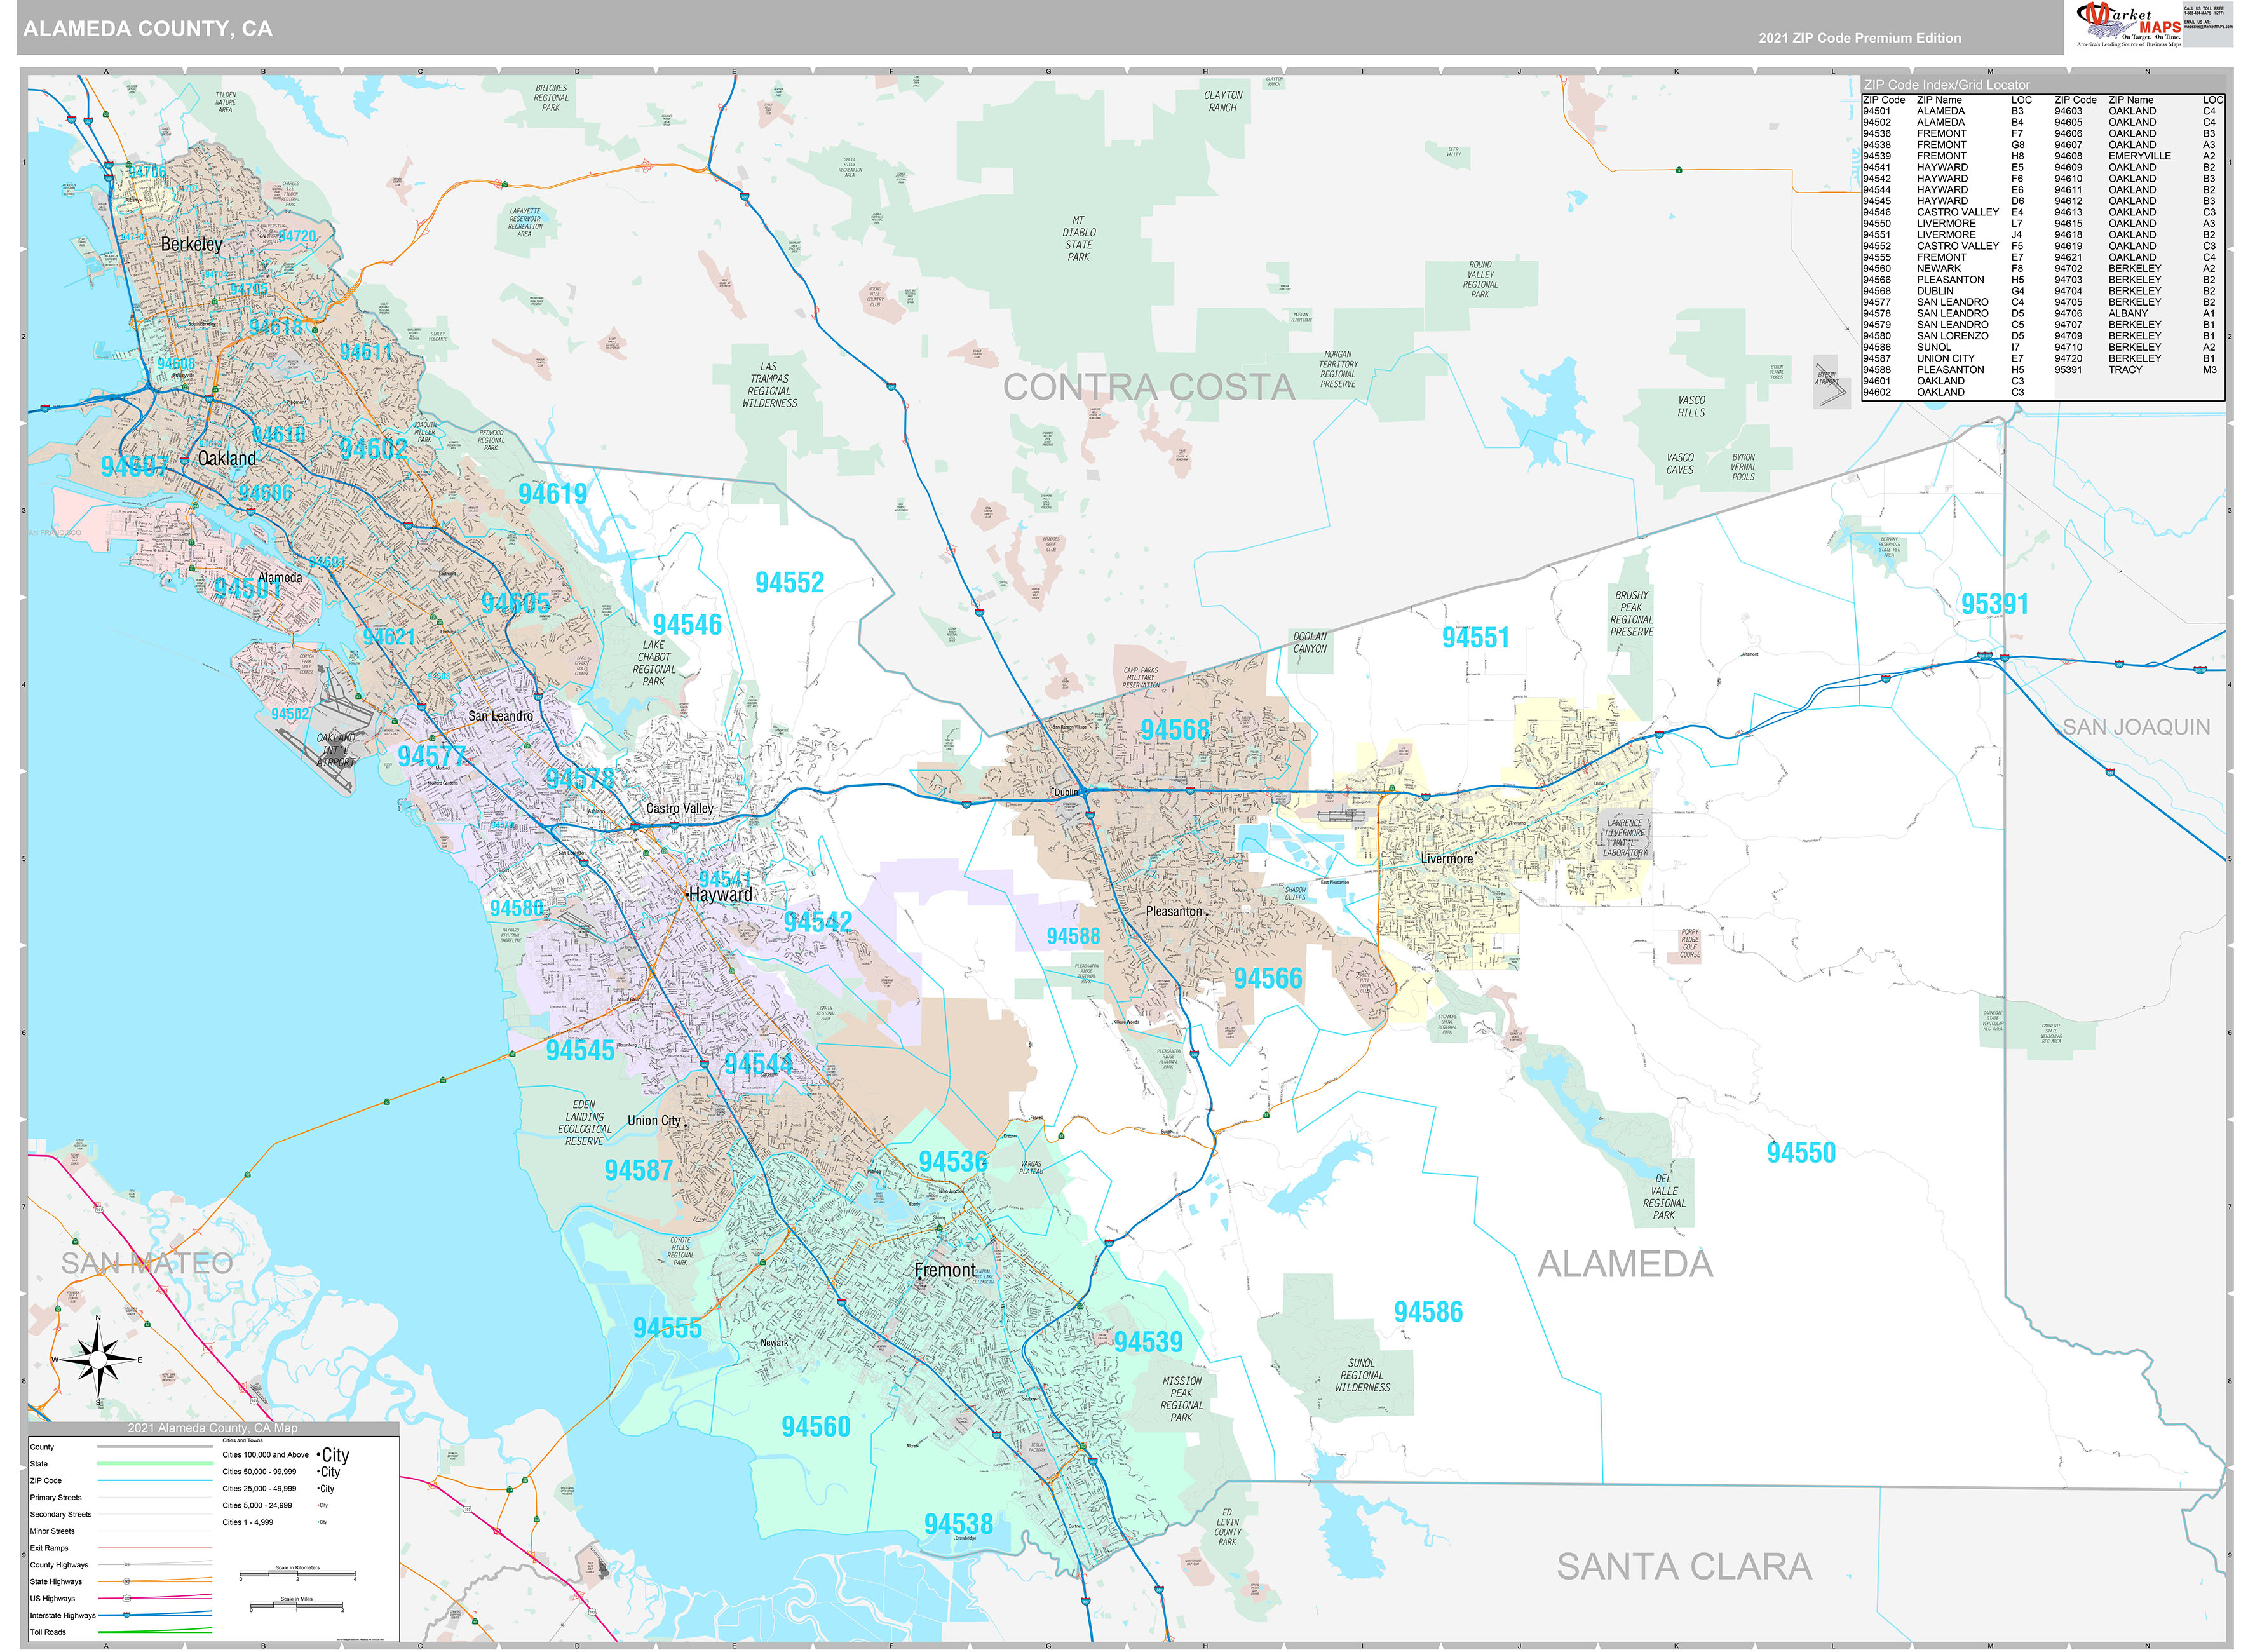 Alameda County, CA Wall Map Premium Style by MarketMAPS - MapSales.com